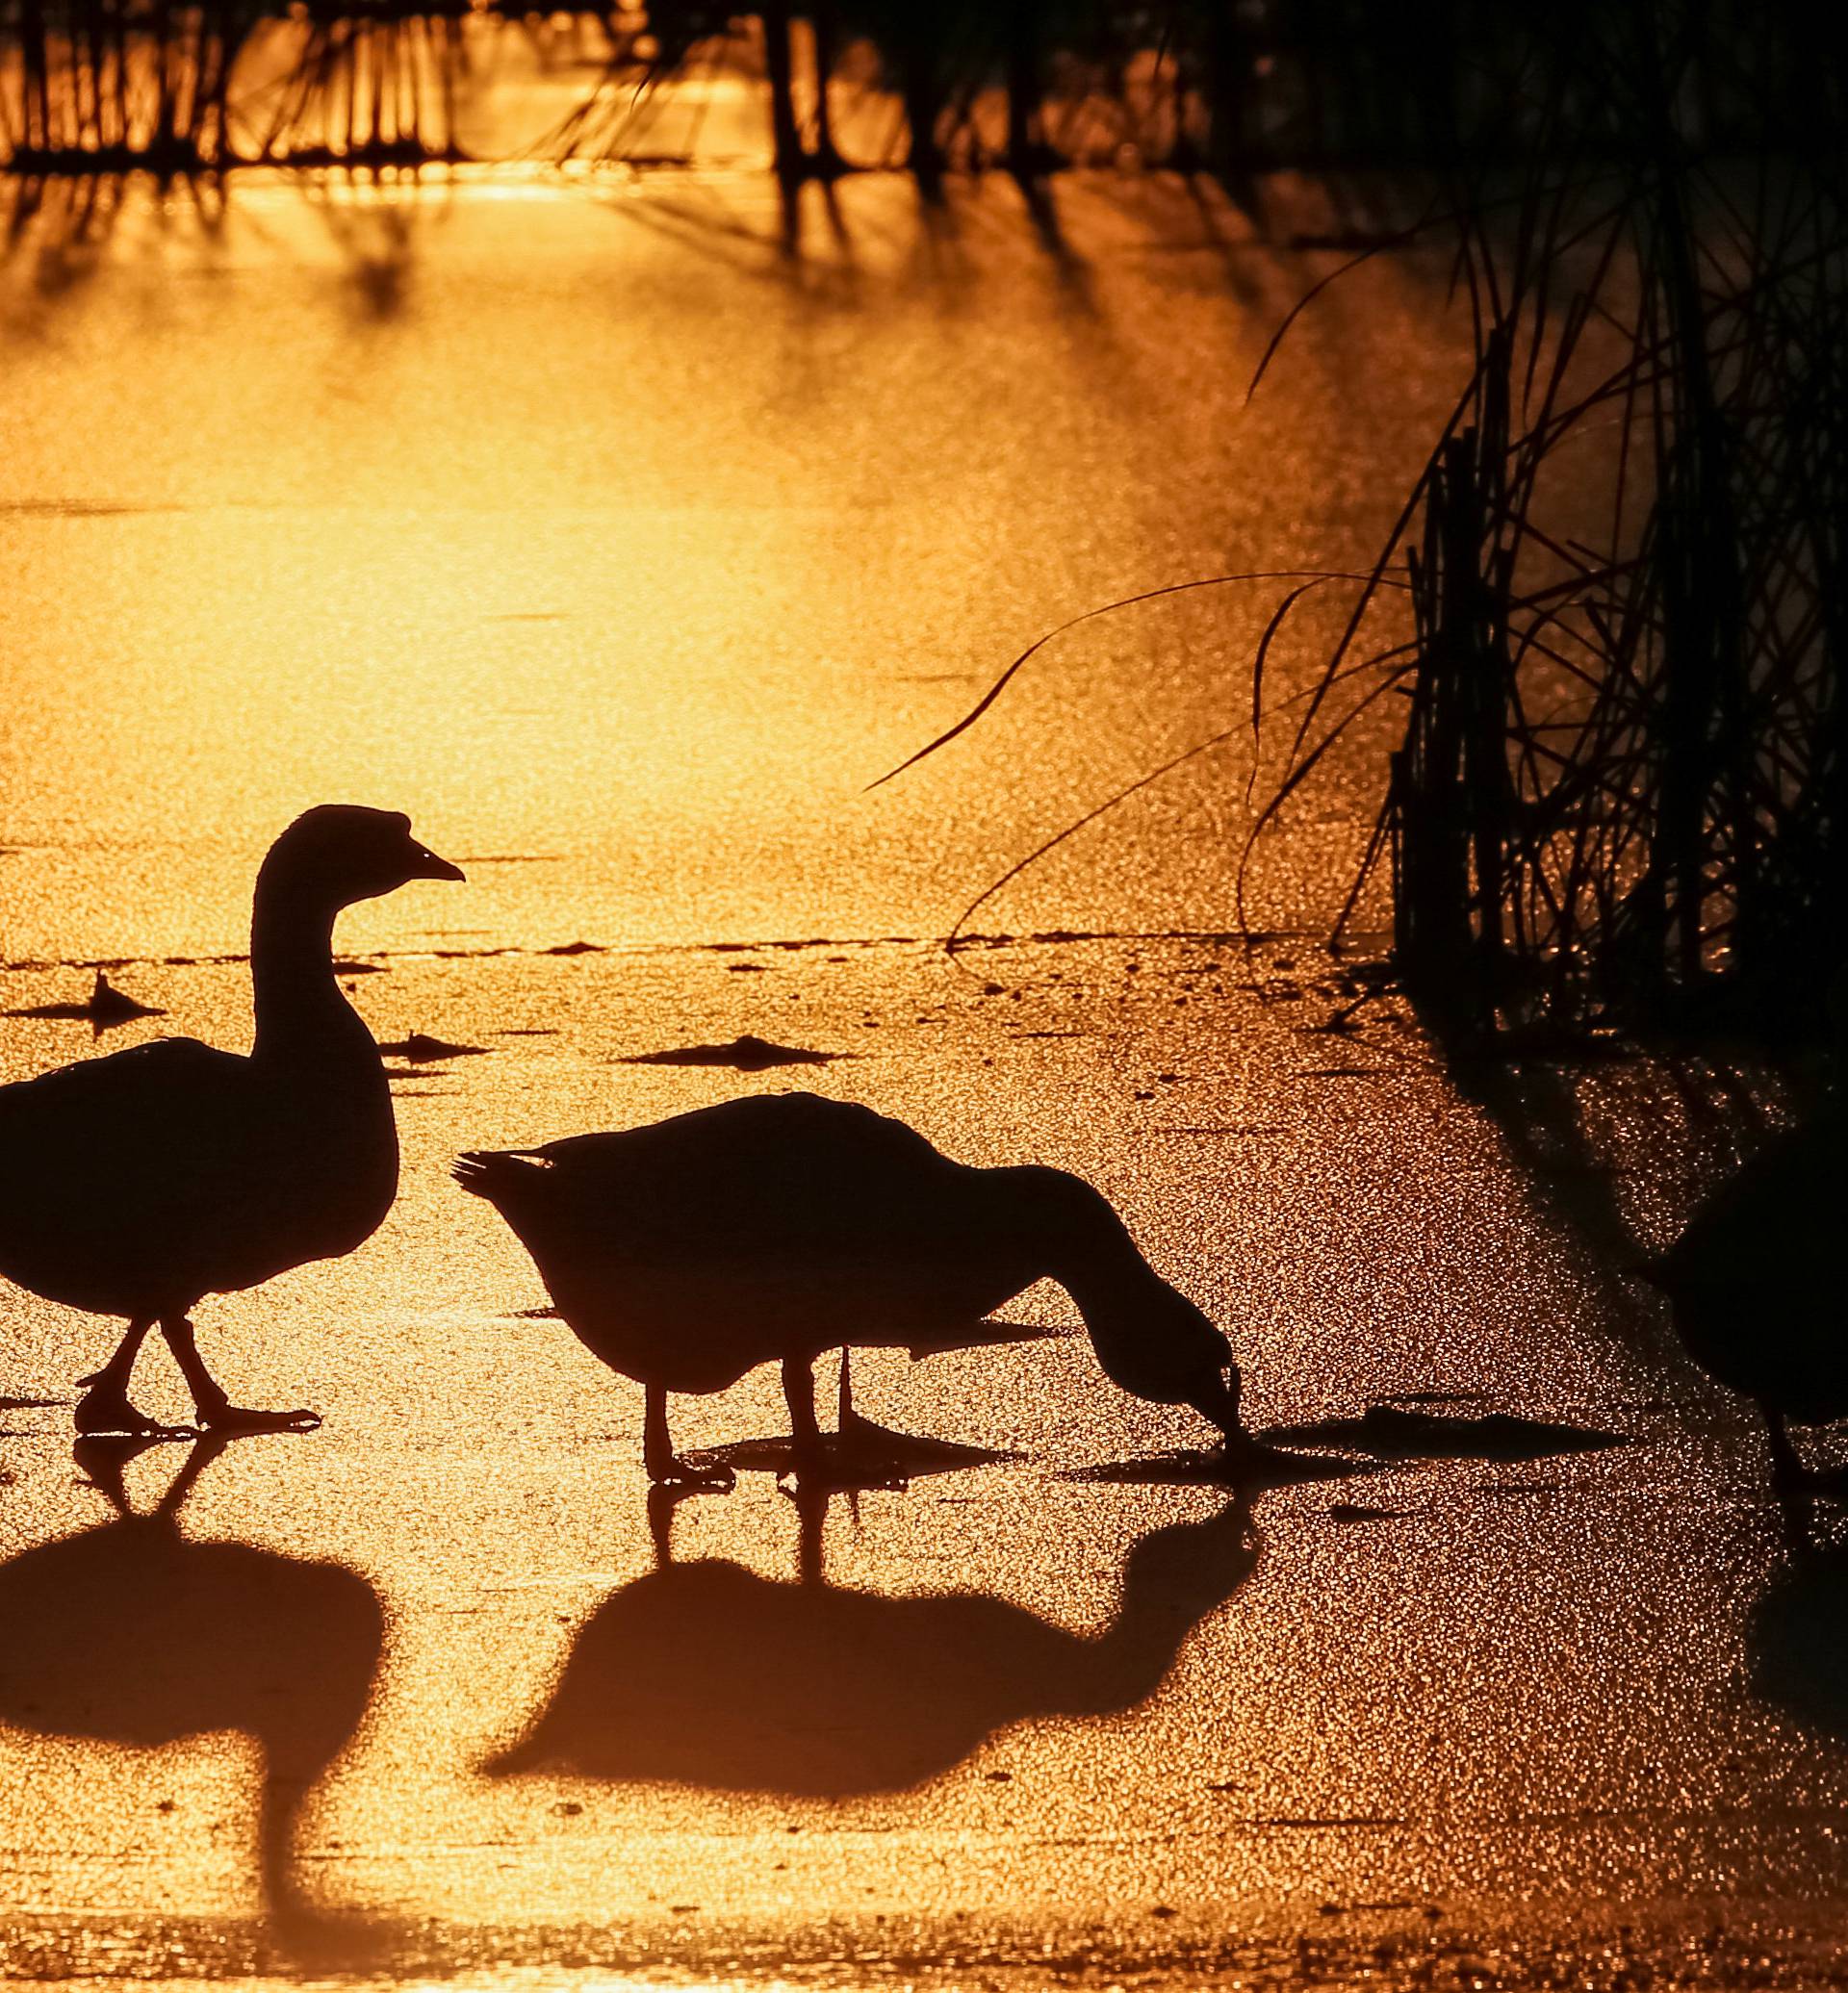 Geese are seen silhouetted against the setting sun at a lake in the village of Peremoha